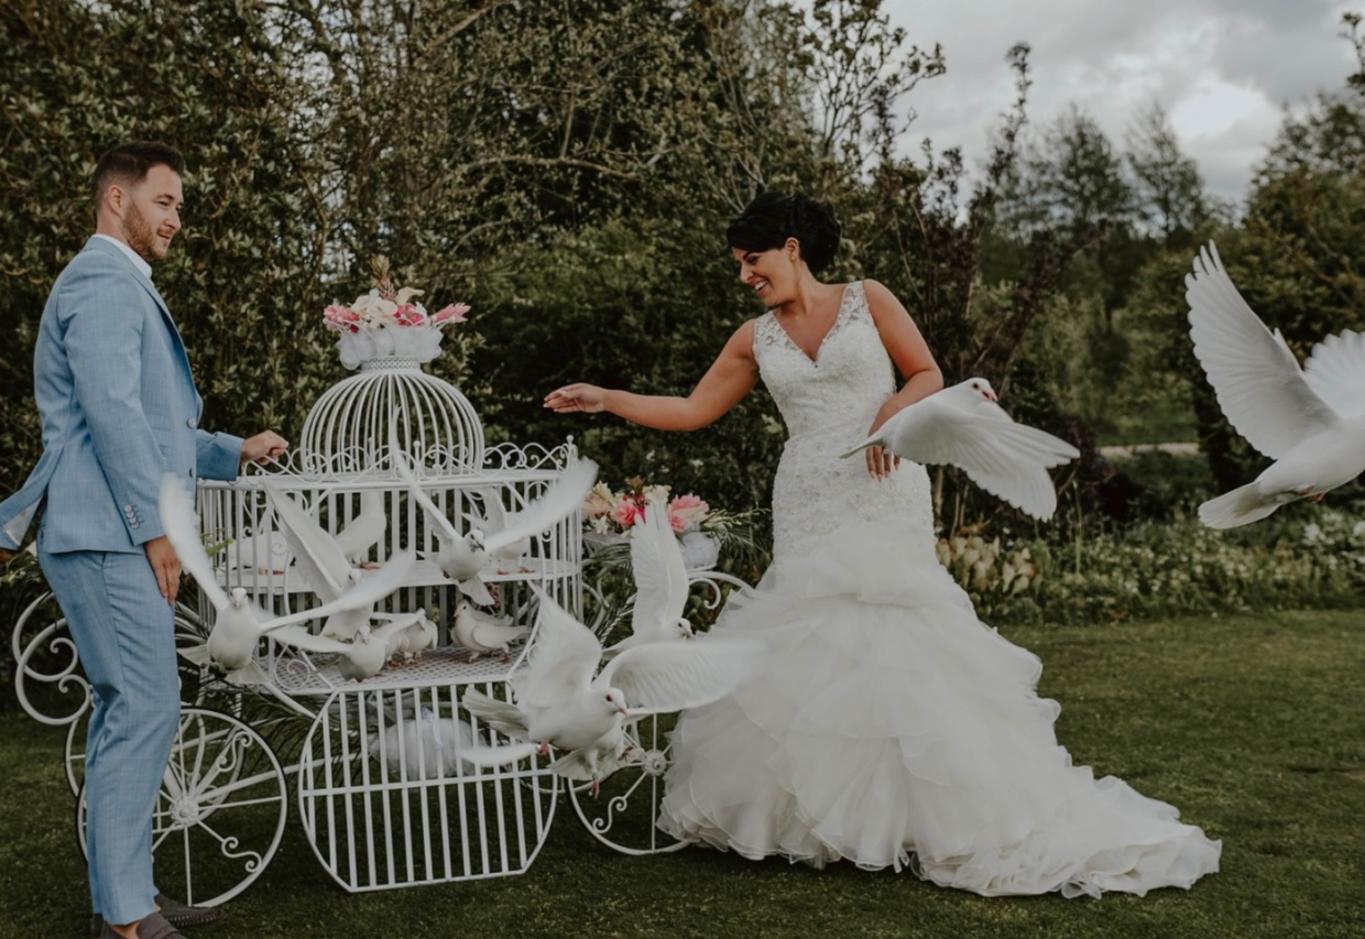 Wrag Barn Golf and Country Club wedding venue Highworth Swindon Wiltshire fully licensed for civil ceremonies princess carriage with white doves for release Joanna Brooks Photography